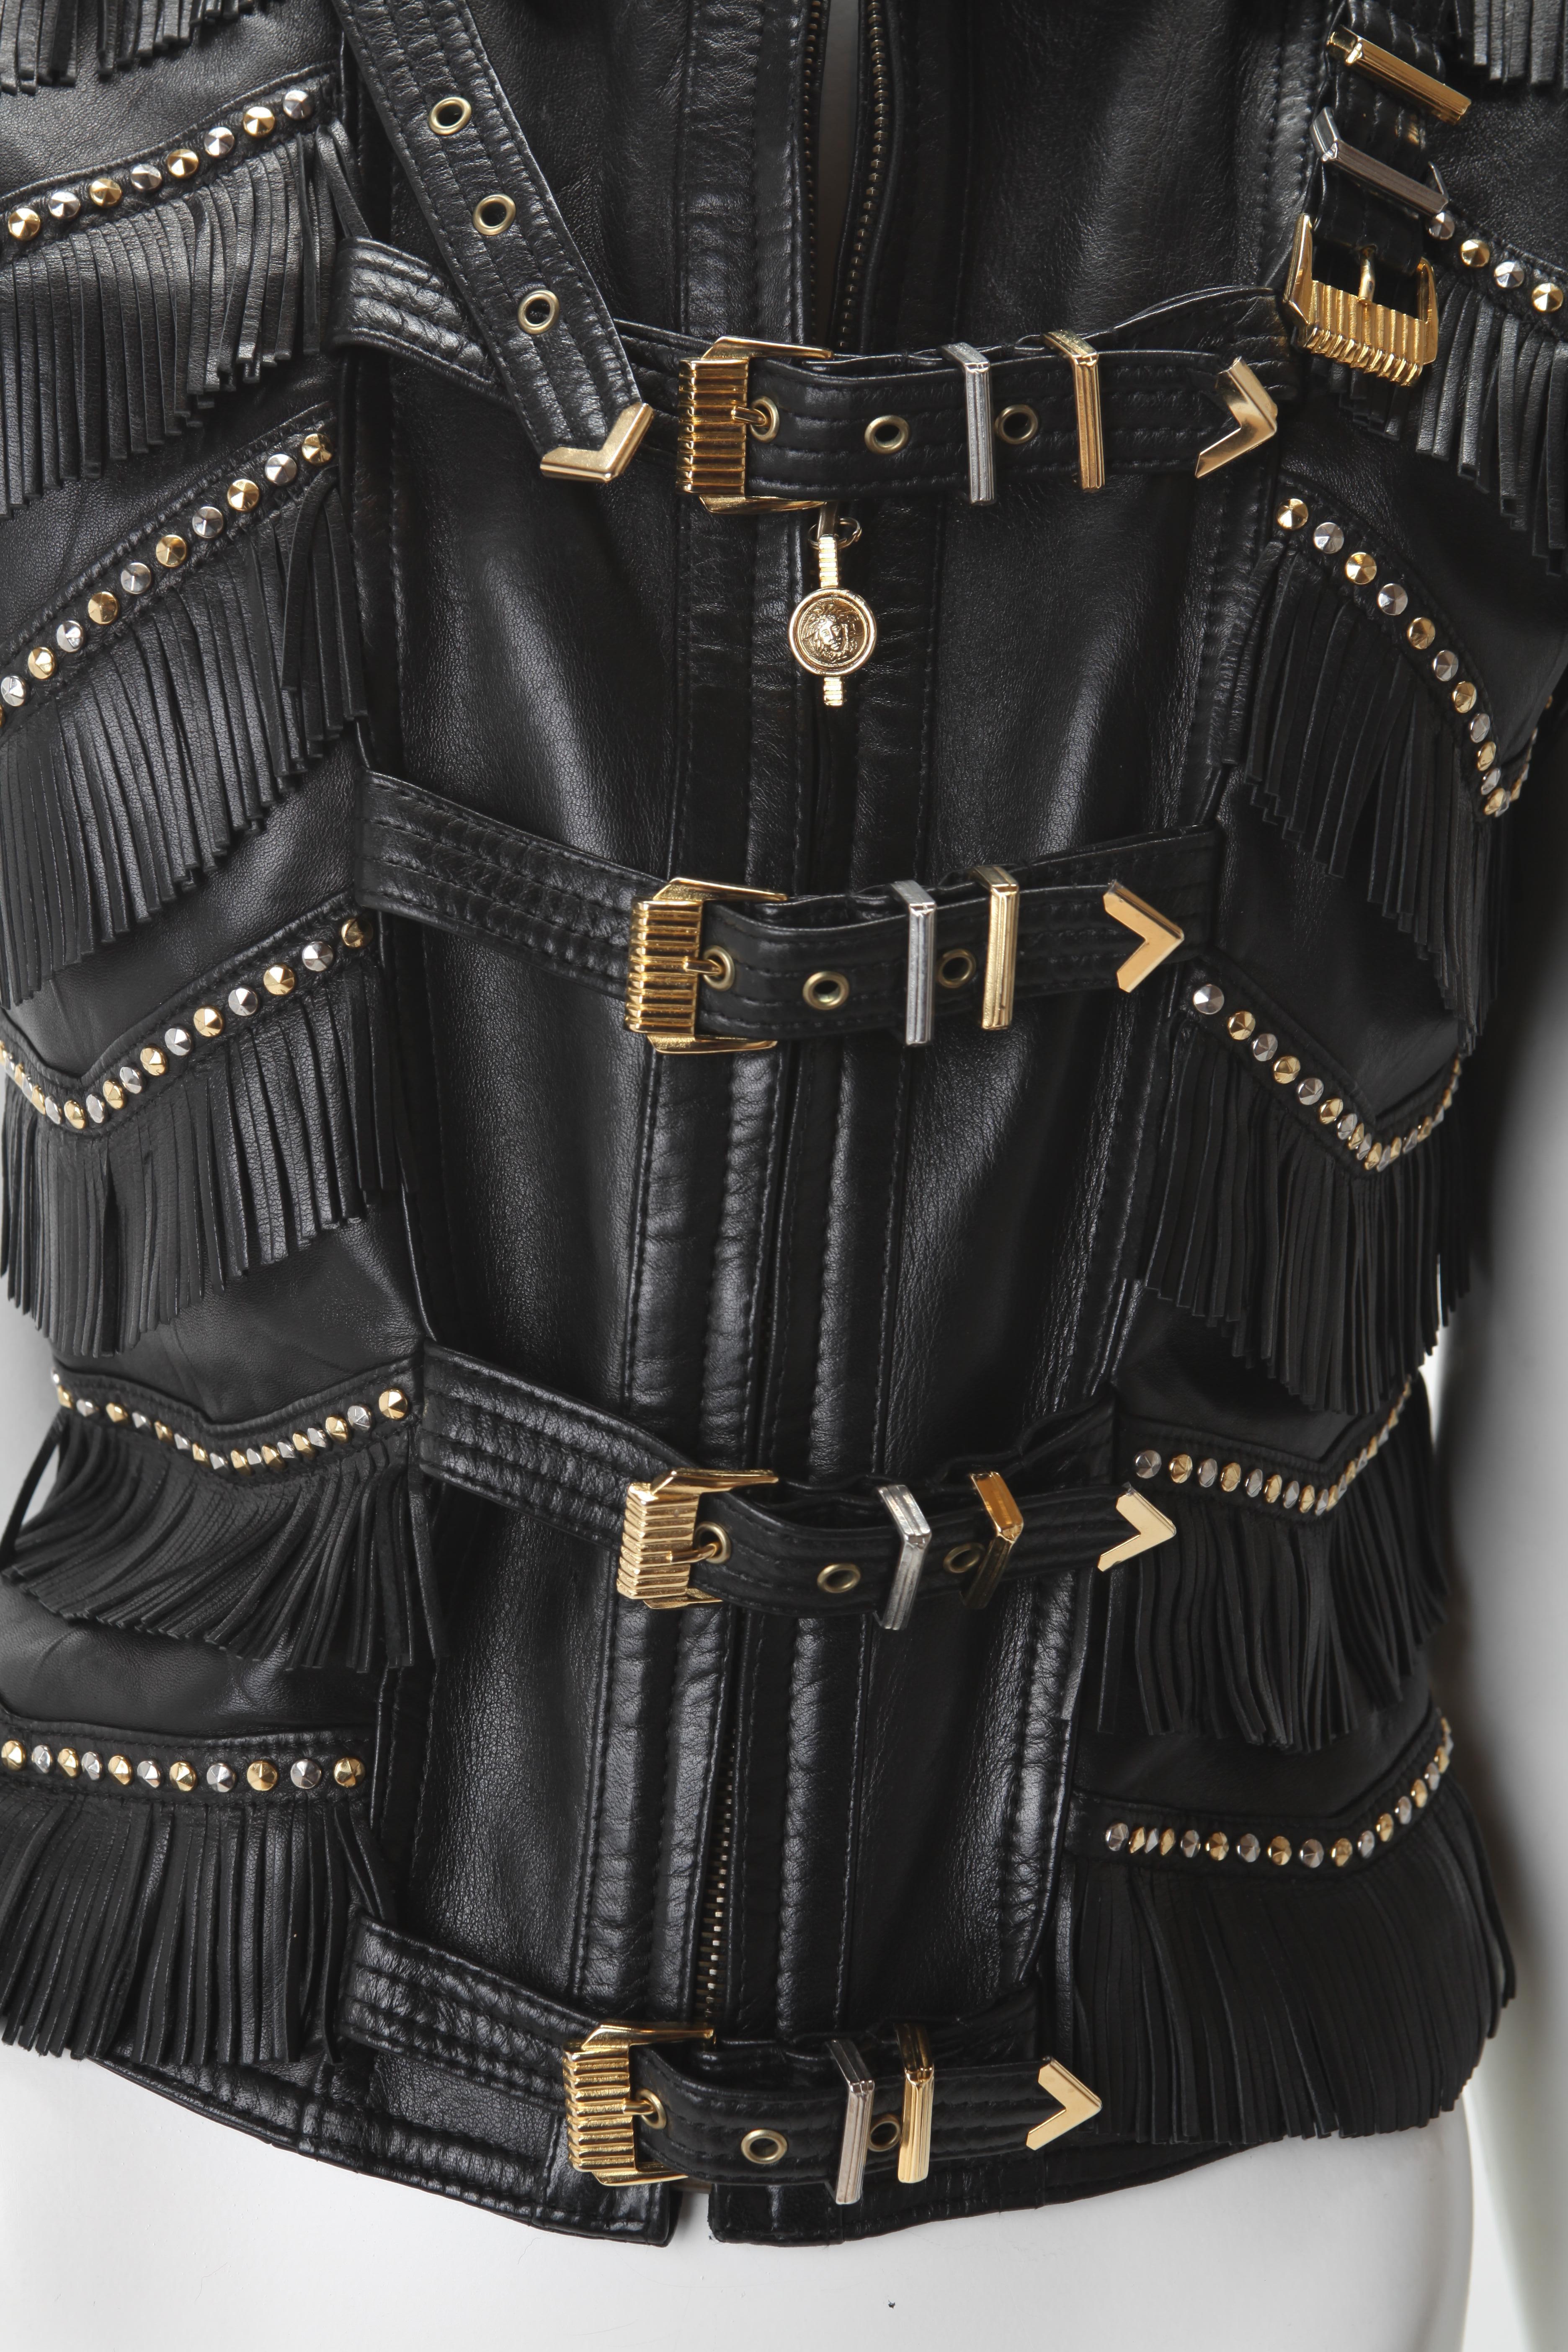 1992 Gianni Versace Black Leather Fringe Bondage Vest. Features silver and gold-tone hardware; Medusa medallion zipper pull. Tiered fringe with studded accents. 100% Leather with rayon lining.  size 4/6